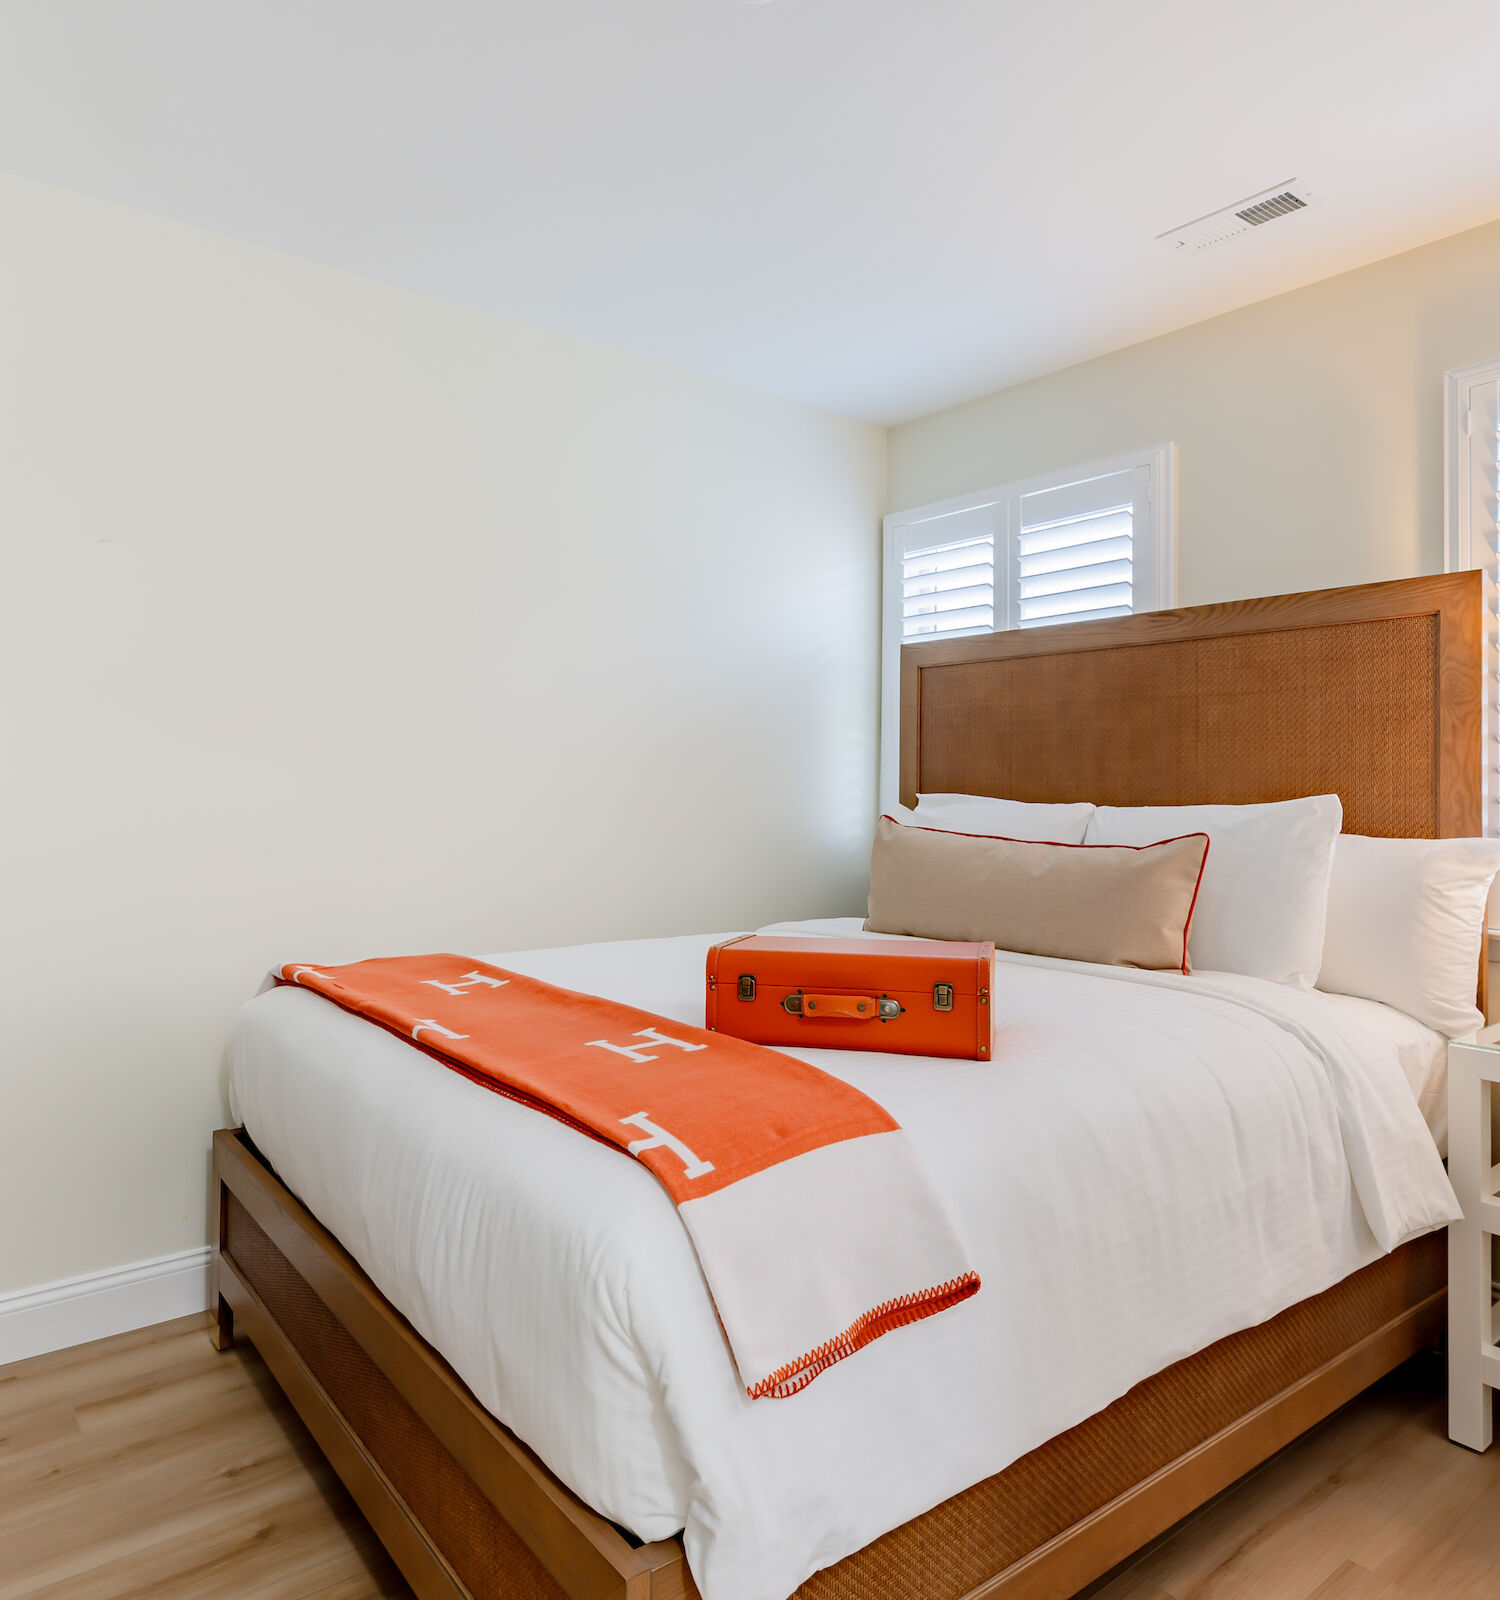 A bright bedroom with a large bed, wooden headboard, orange and white blanket, and suitcase; nightstand with lamp; dresser with bag.